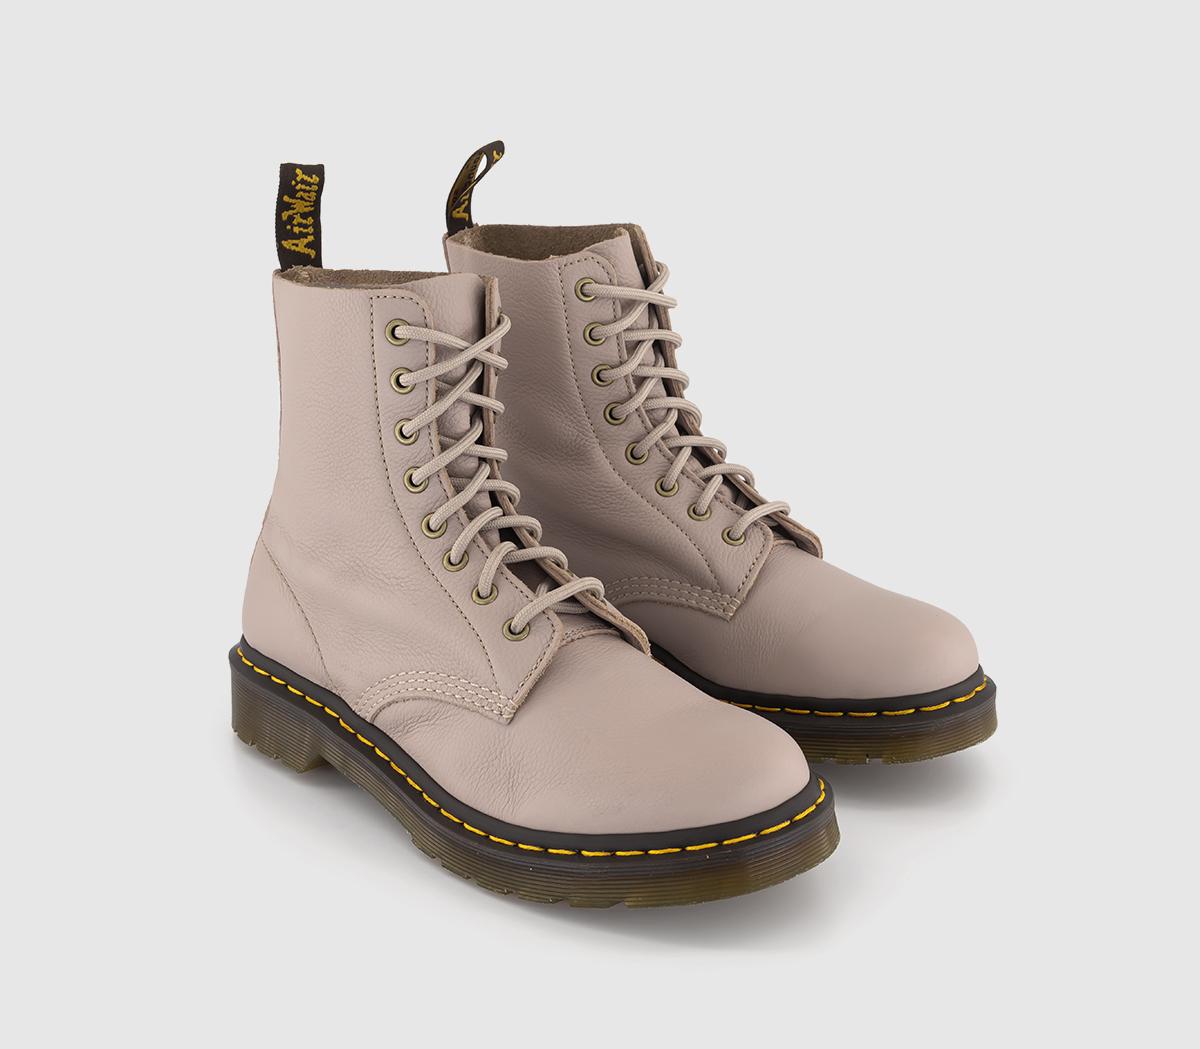 Dr. Martens Womens 8 Eyelet Lace Up Boots Vintage Taupe Natural, 3